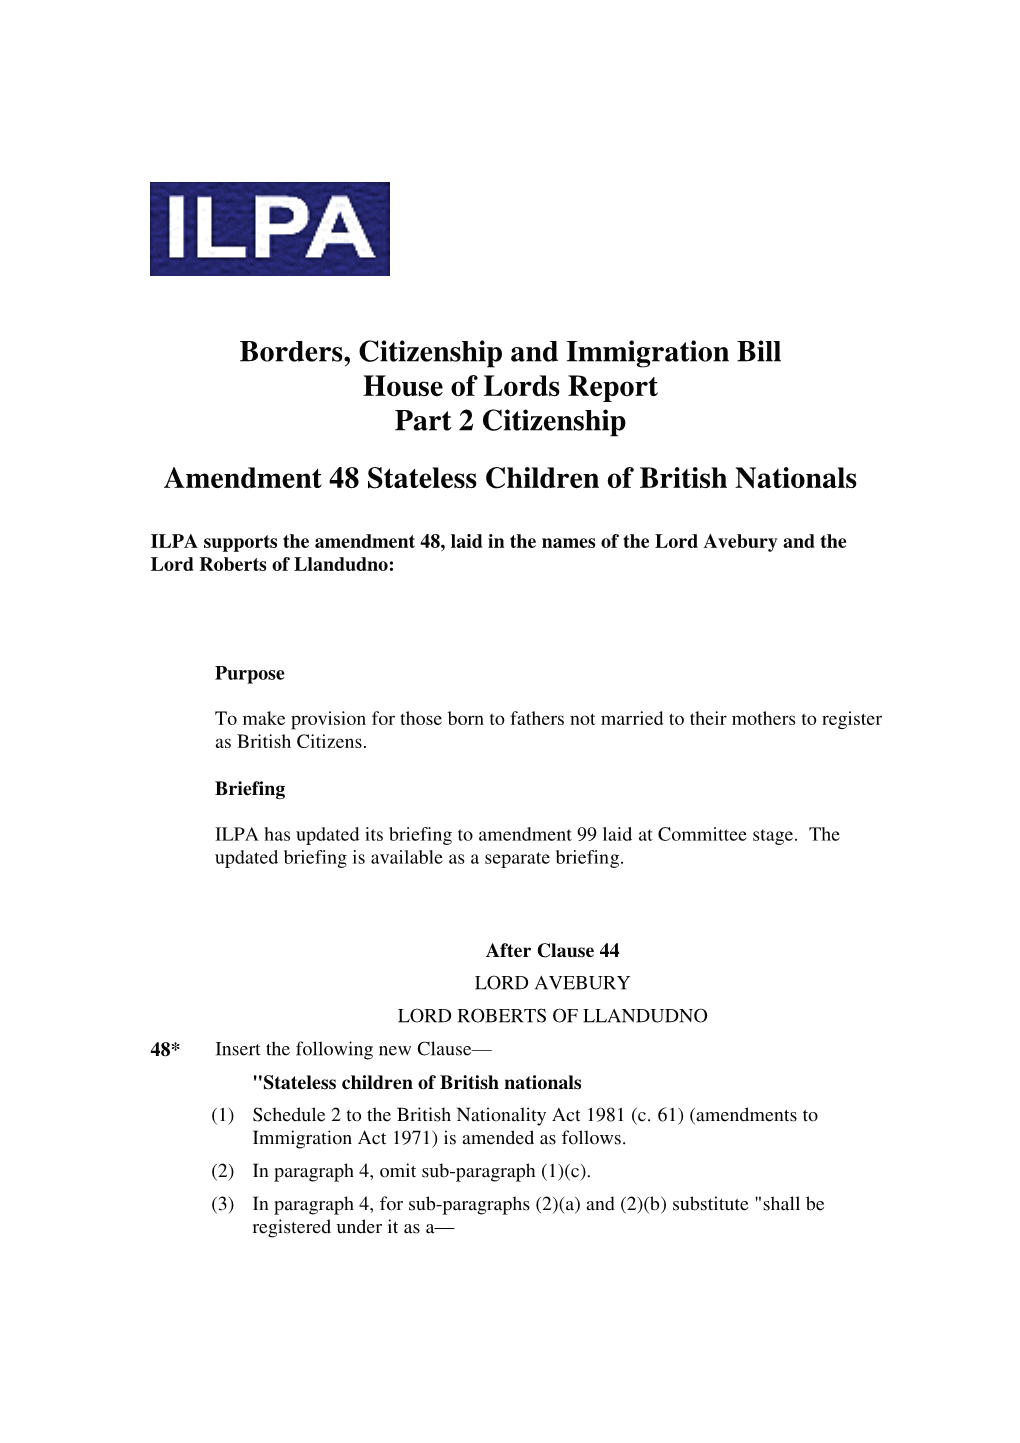 Borders, Citizenship and Immigration Bill House of Lords Report Part 2 Citizenship